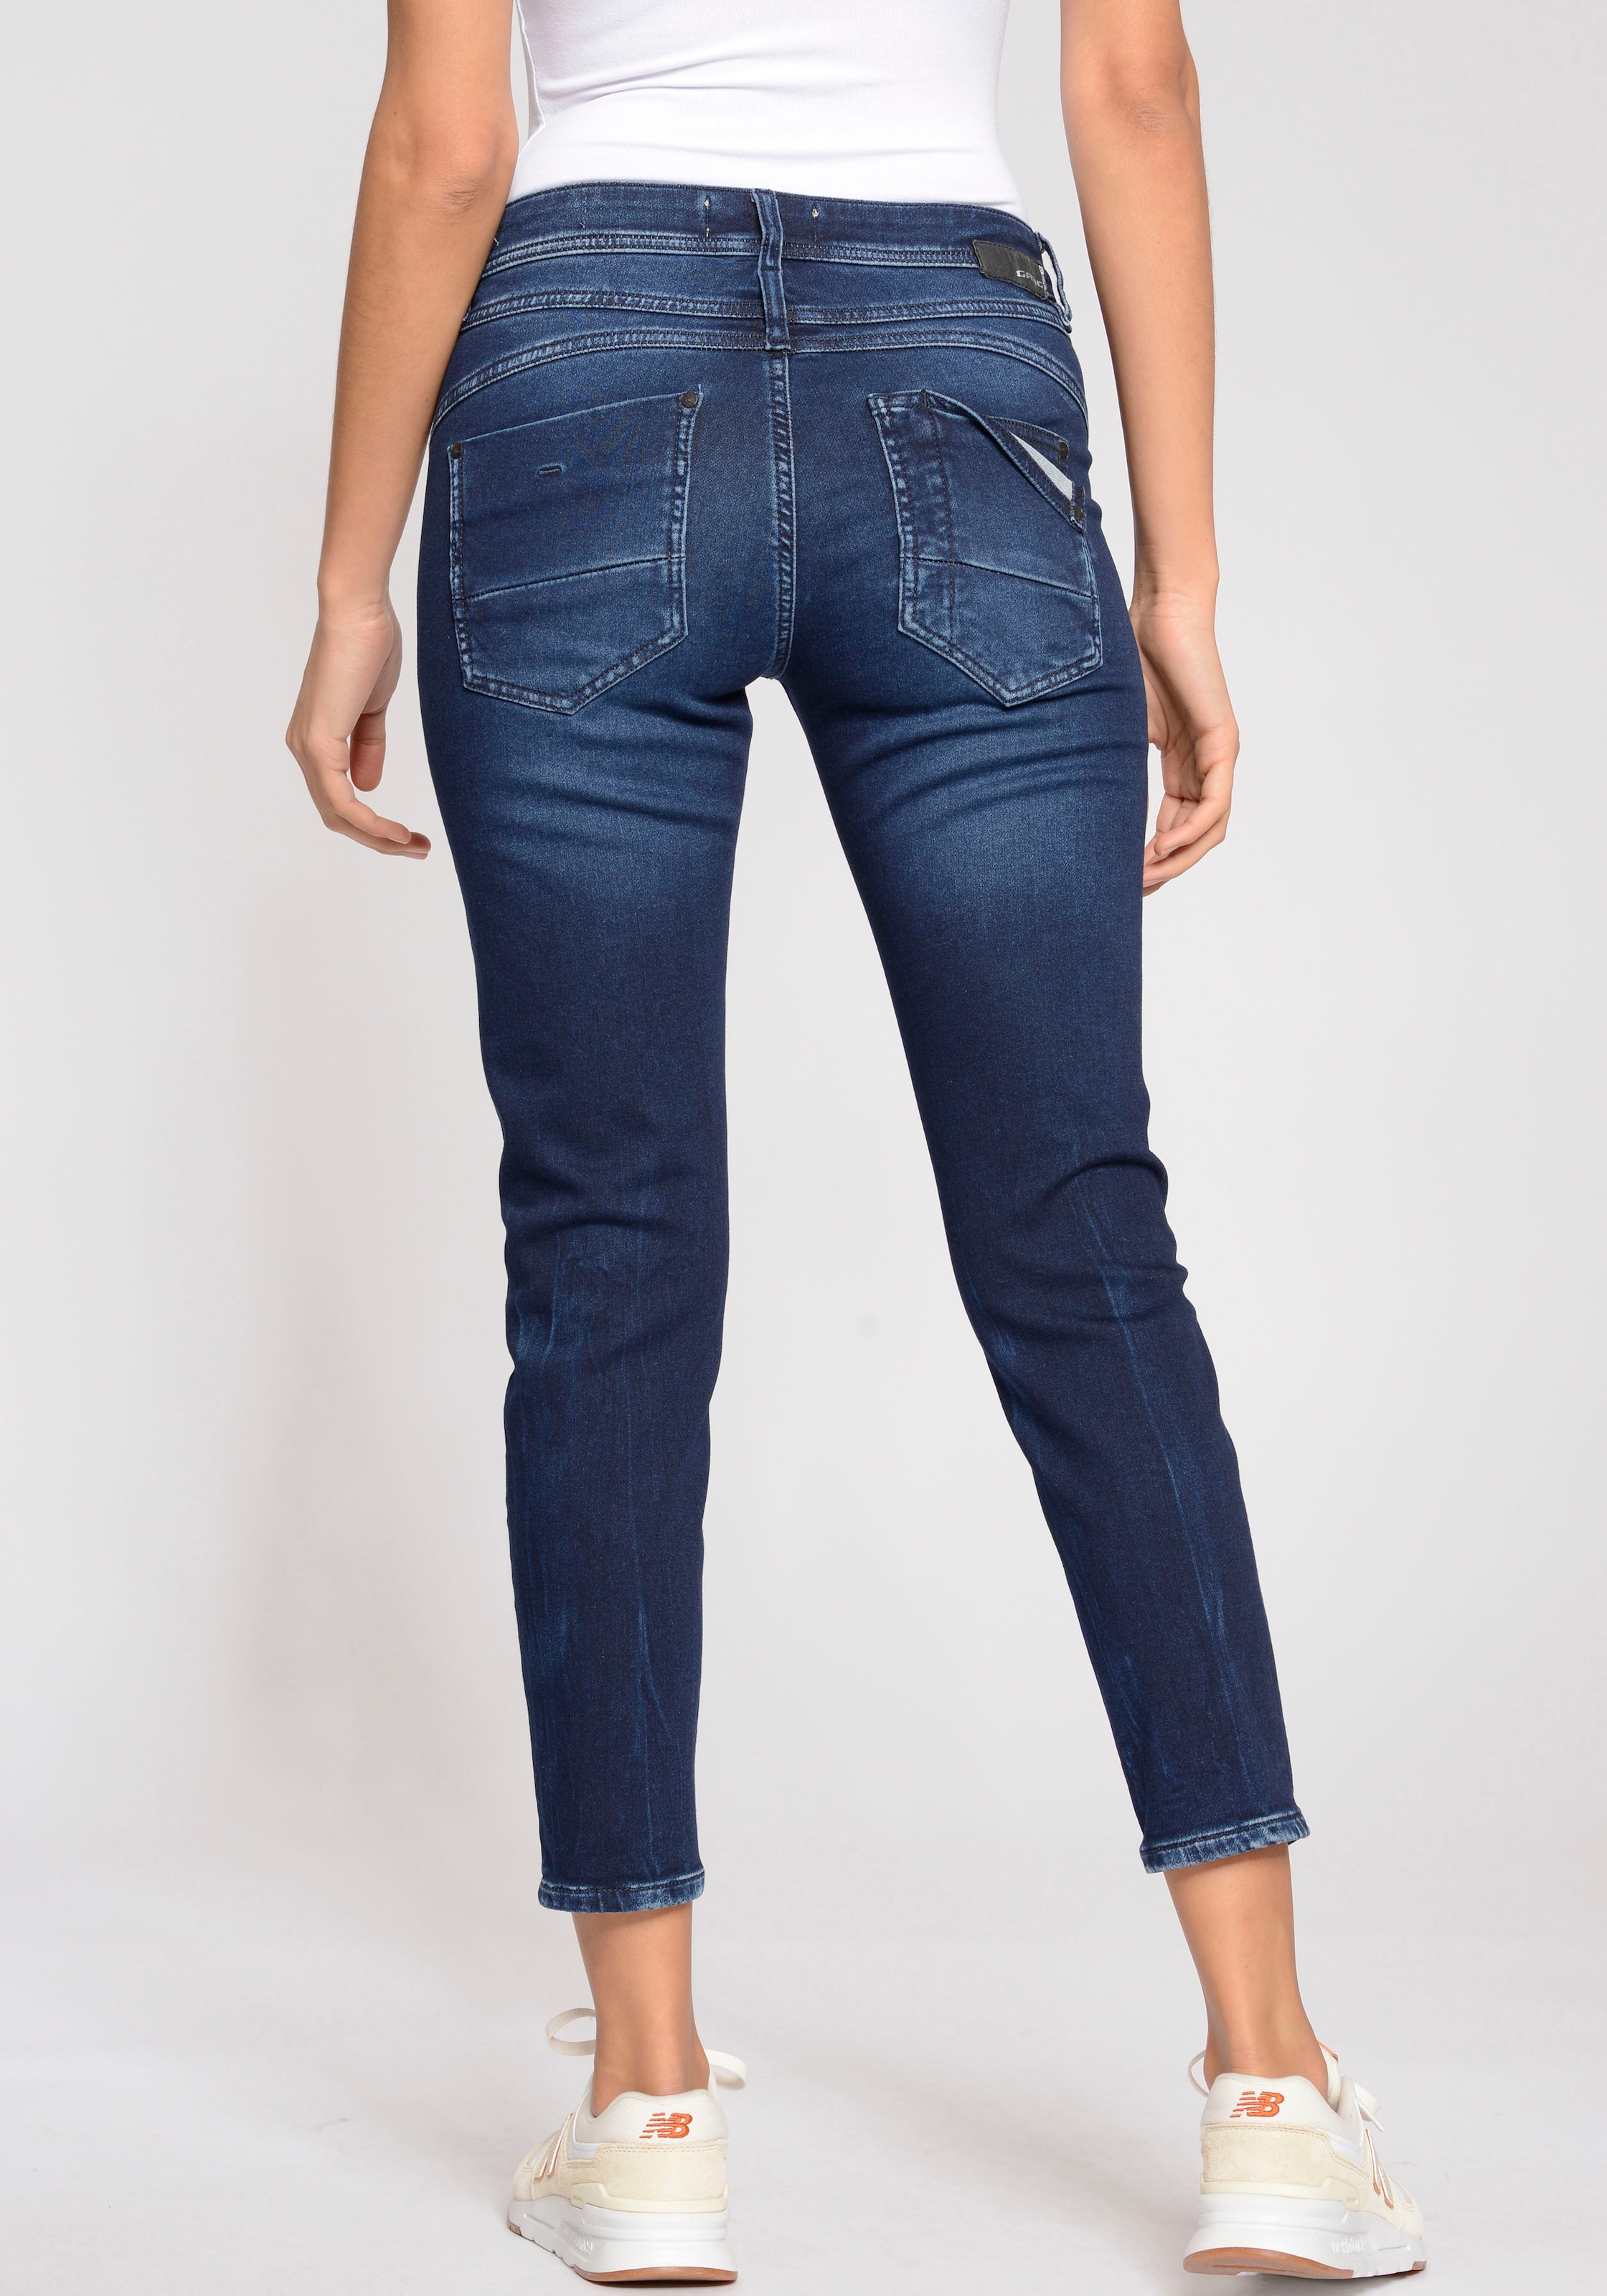 »94Amelie GANG OTTO bei Cropped« Relax-fit-Jeans kaufen